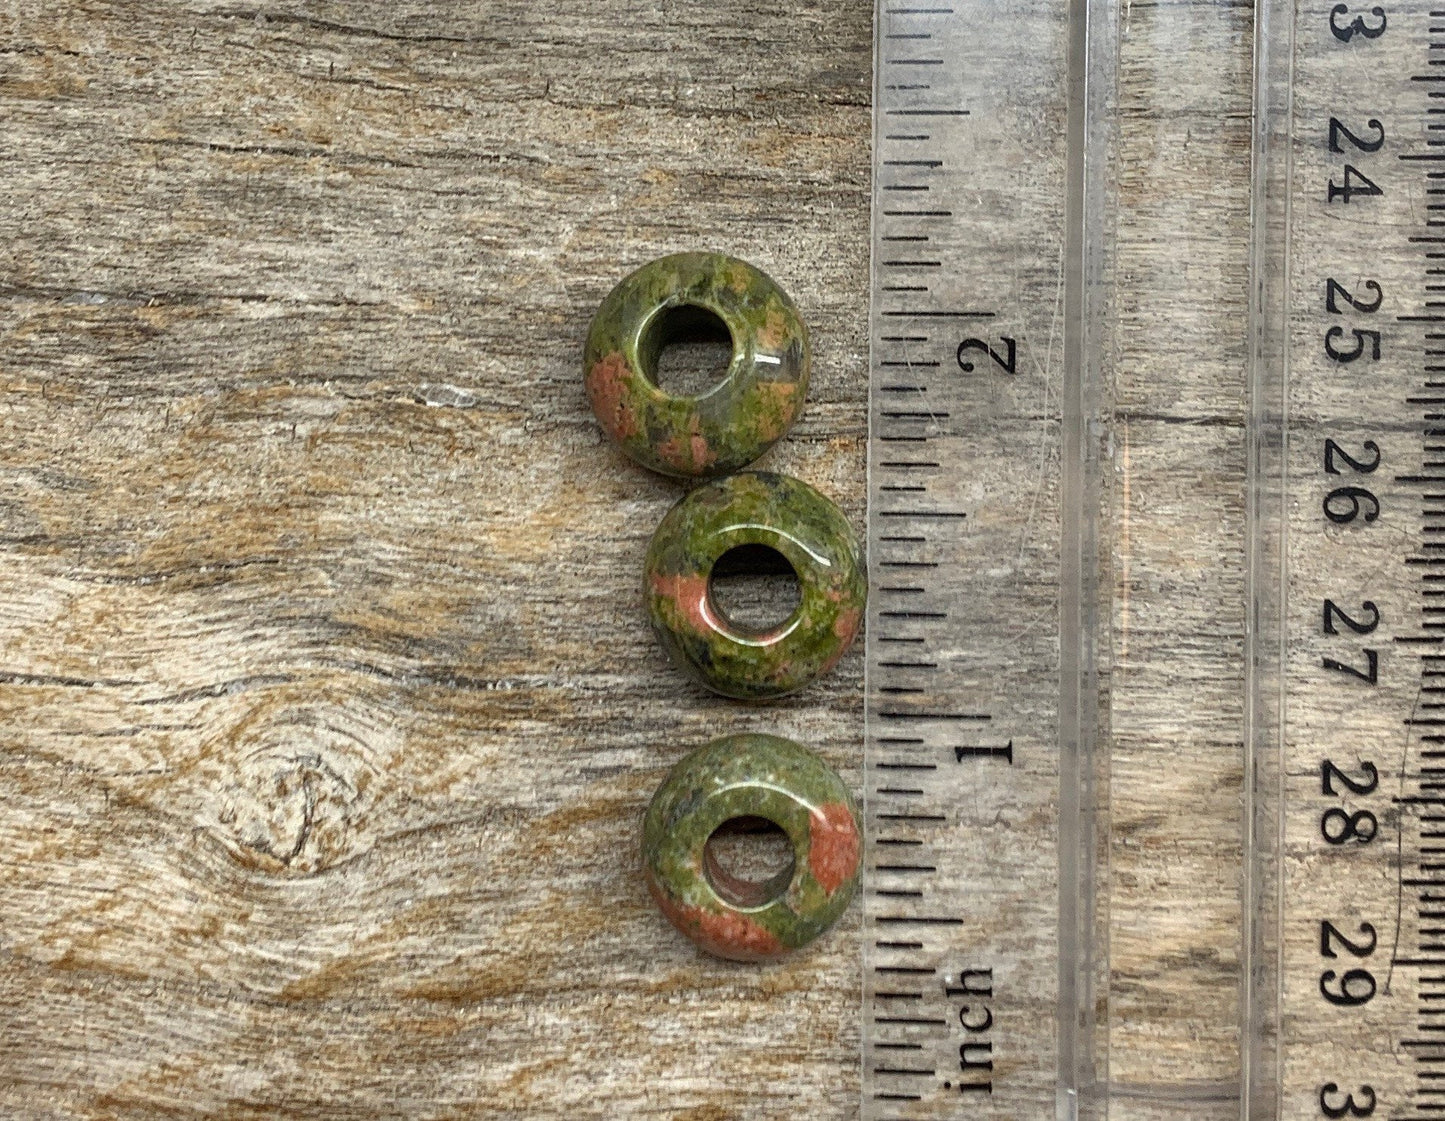 Unakite Jasper beads featuring earthy green and peach tones, next to a ruler